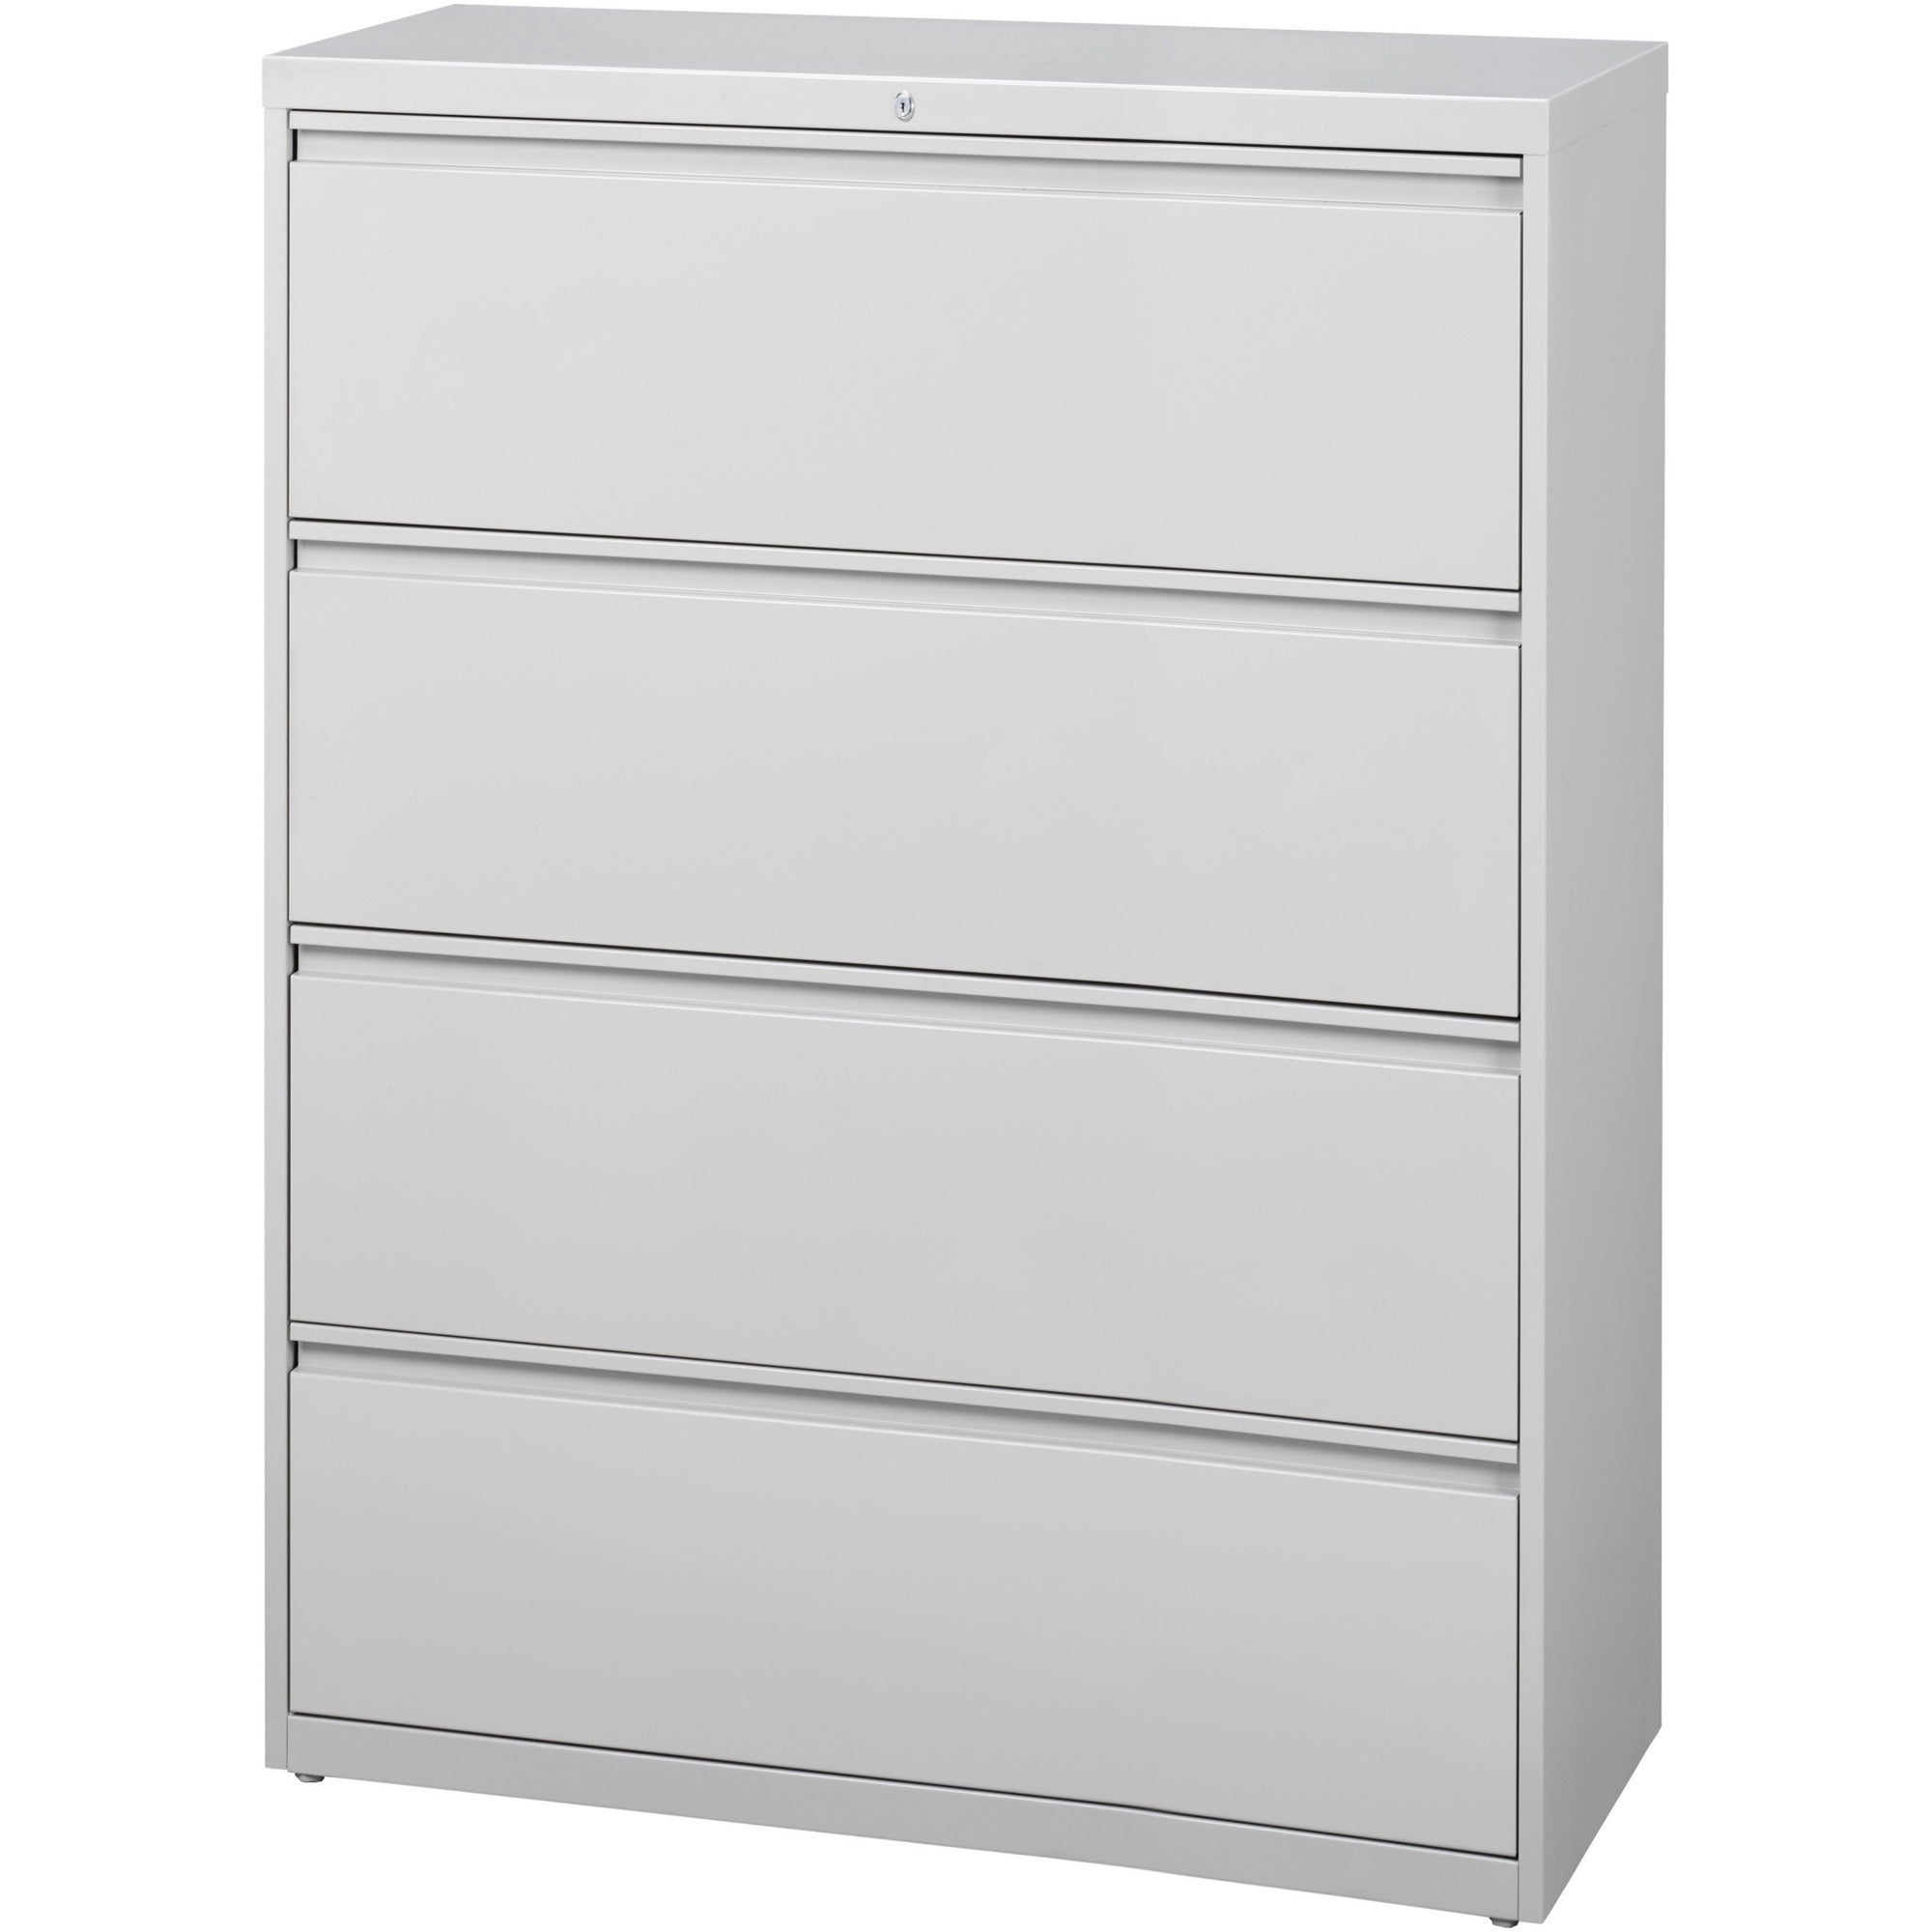 Lorell Fortress Series Lateral File - 42" x 18.6" x 52.5" - 4 x Drawer(s) for File - Legal, Letter, A4 - Lateral - Rust Proof, Leveling Glide, Interlocking, Ball-bearing Suspension, Label Holder - Light Gray - Baked Enamel - Steel - Recycled - 